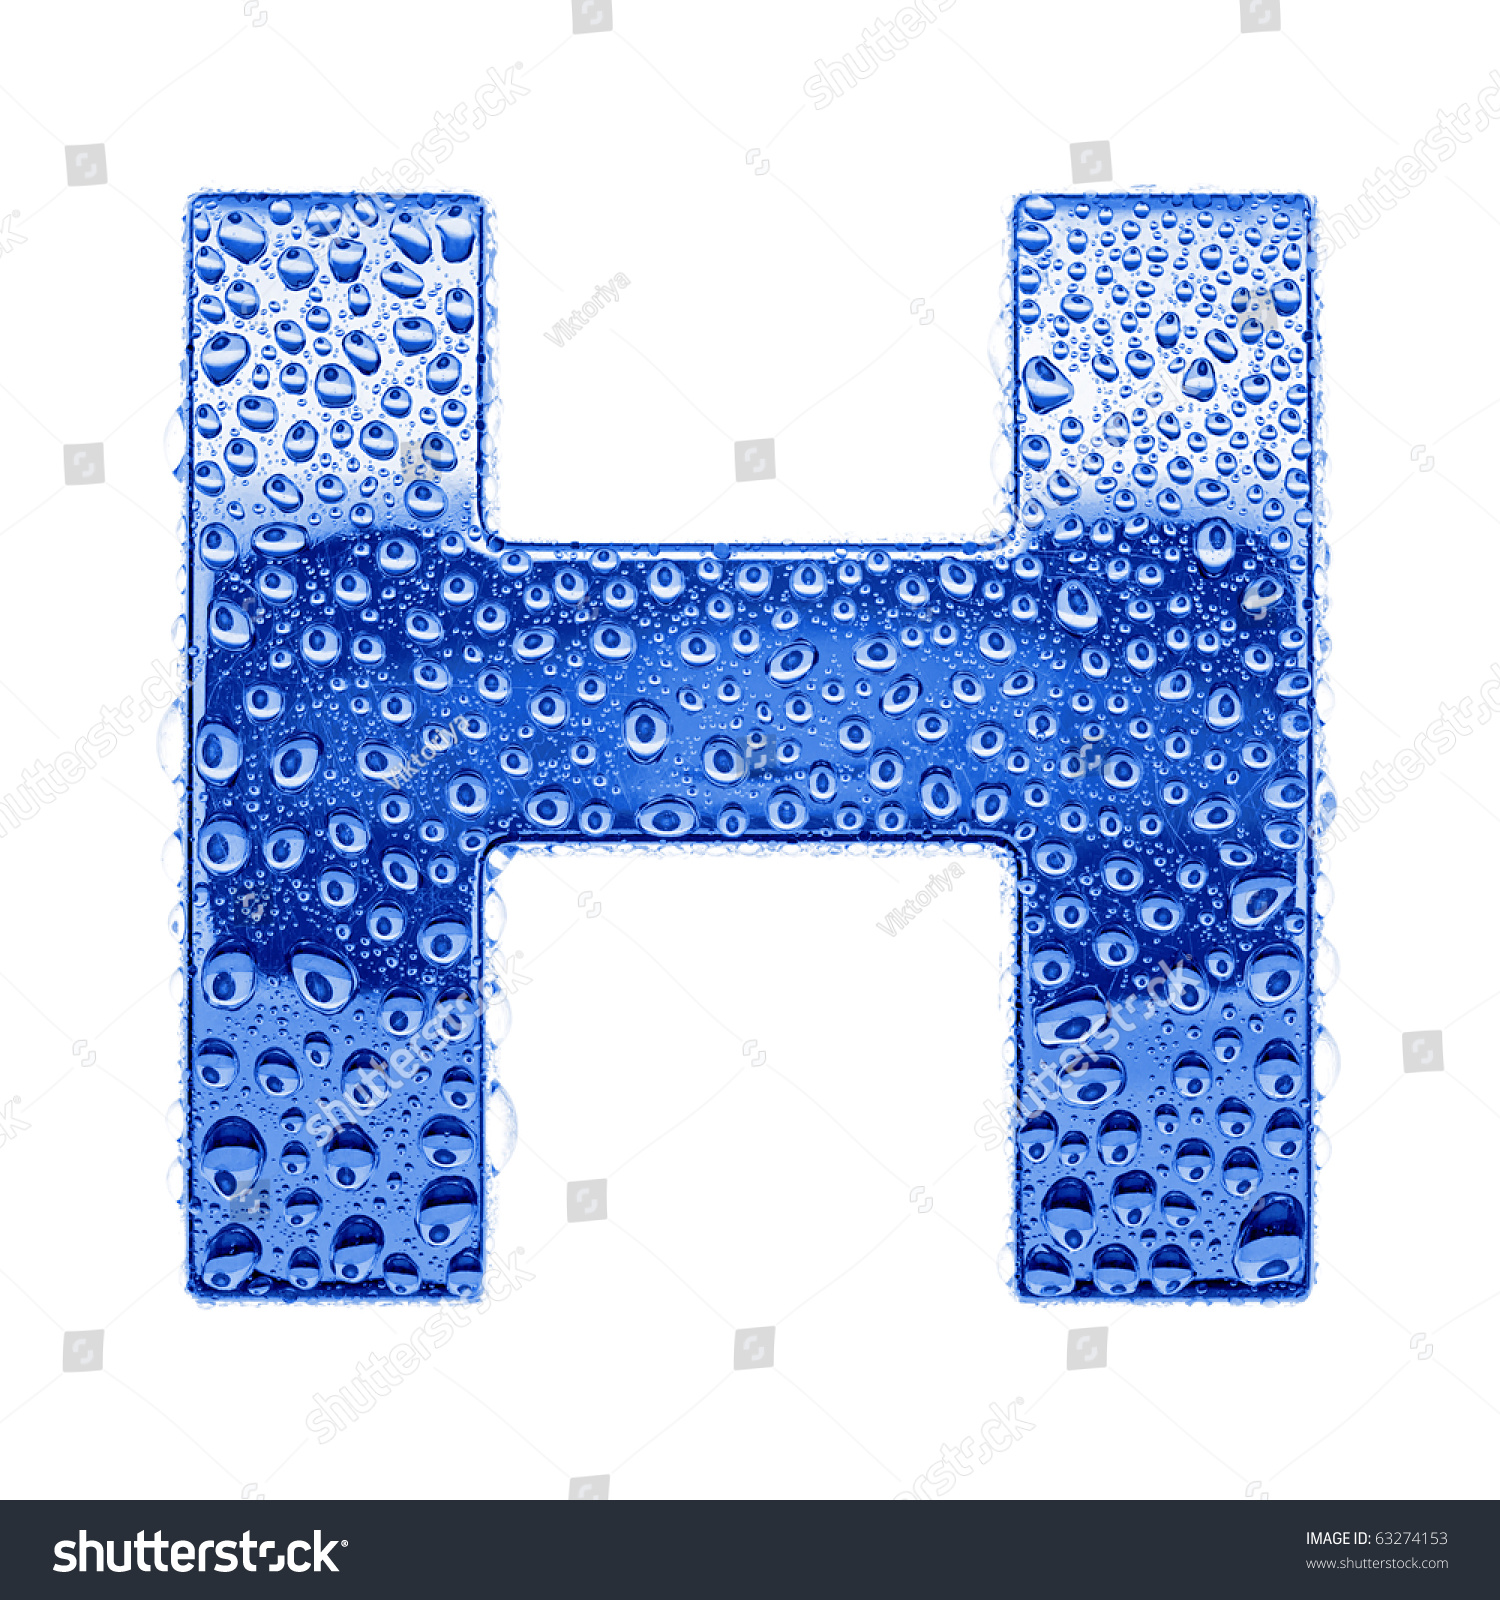 Blue Ice Alphabet Symbol - Letter H. Water Splashes And Drops On Glossy ...